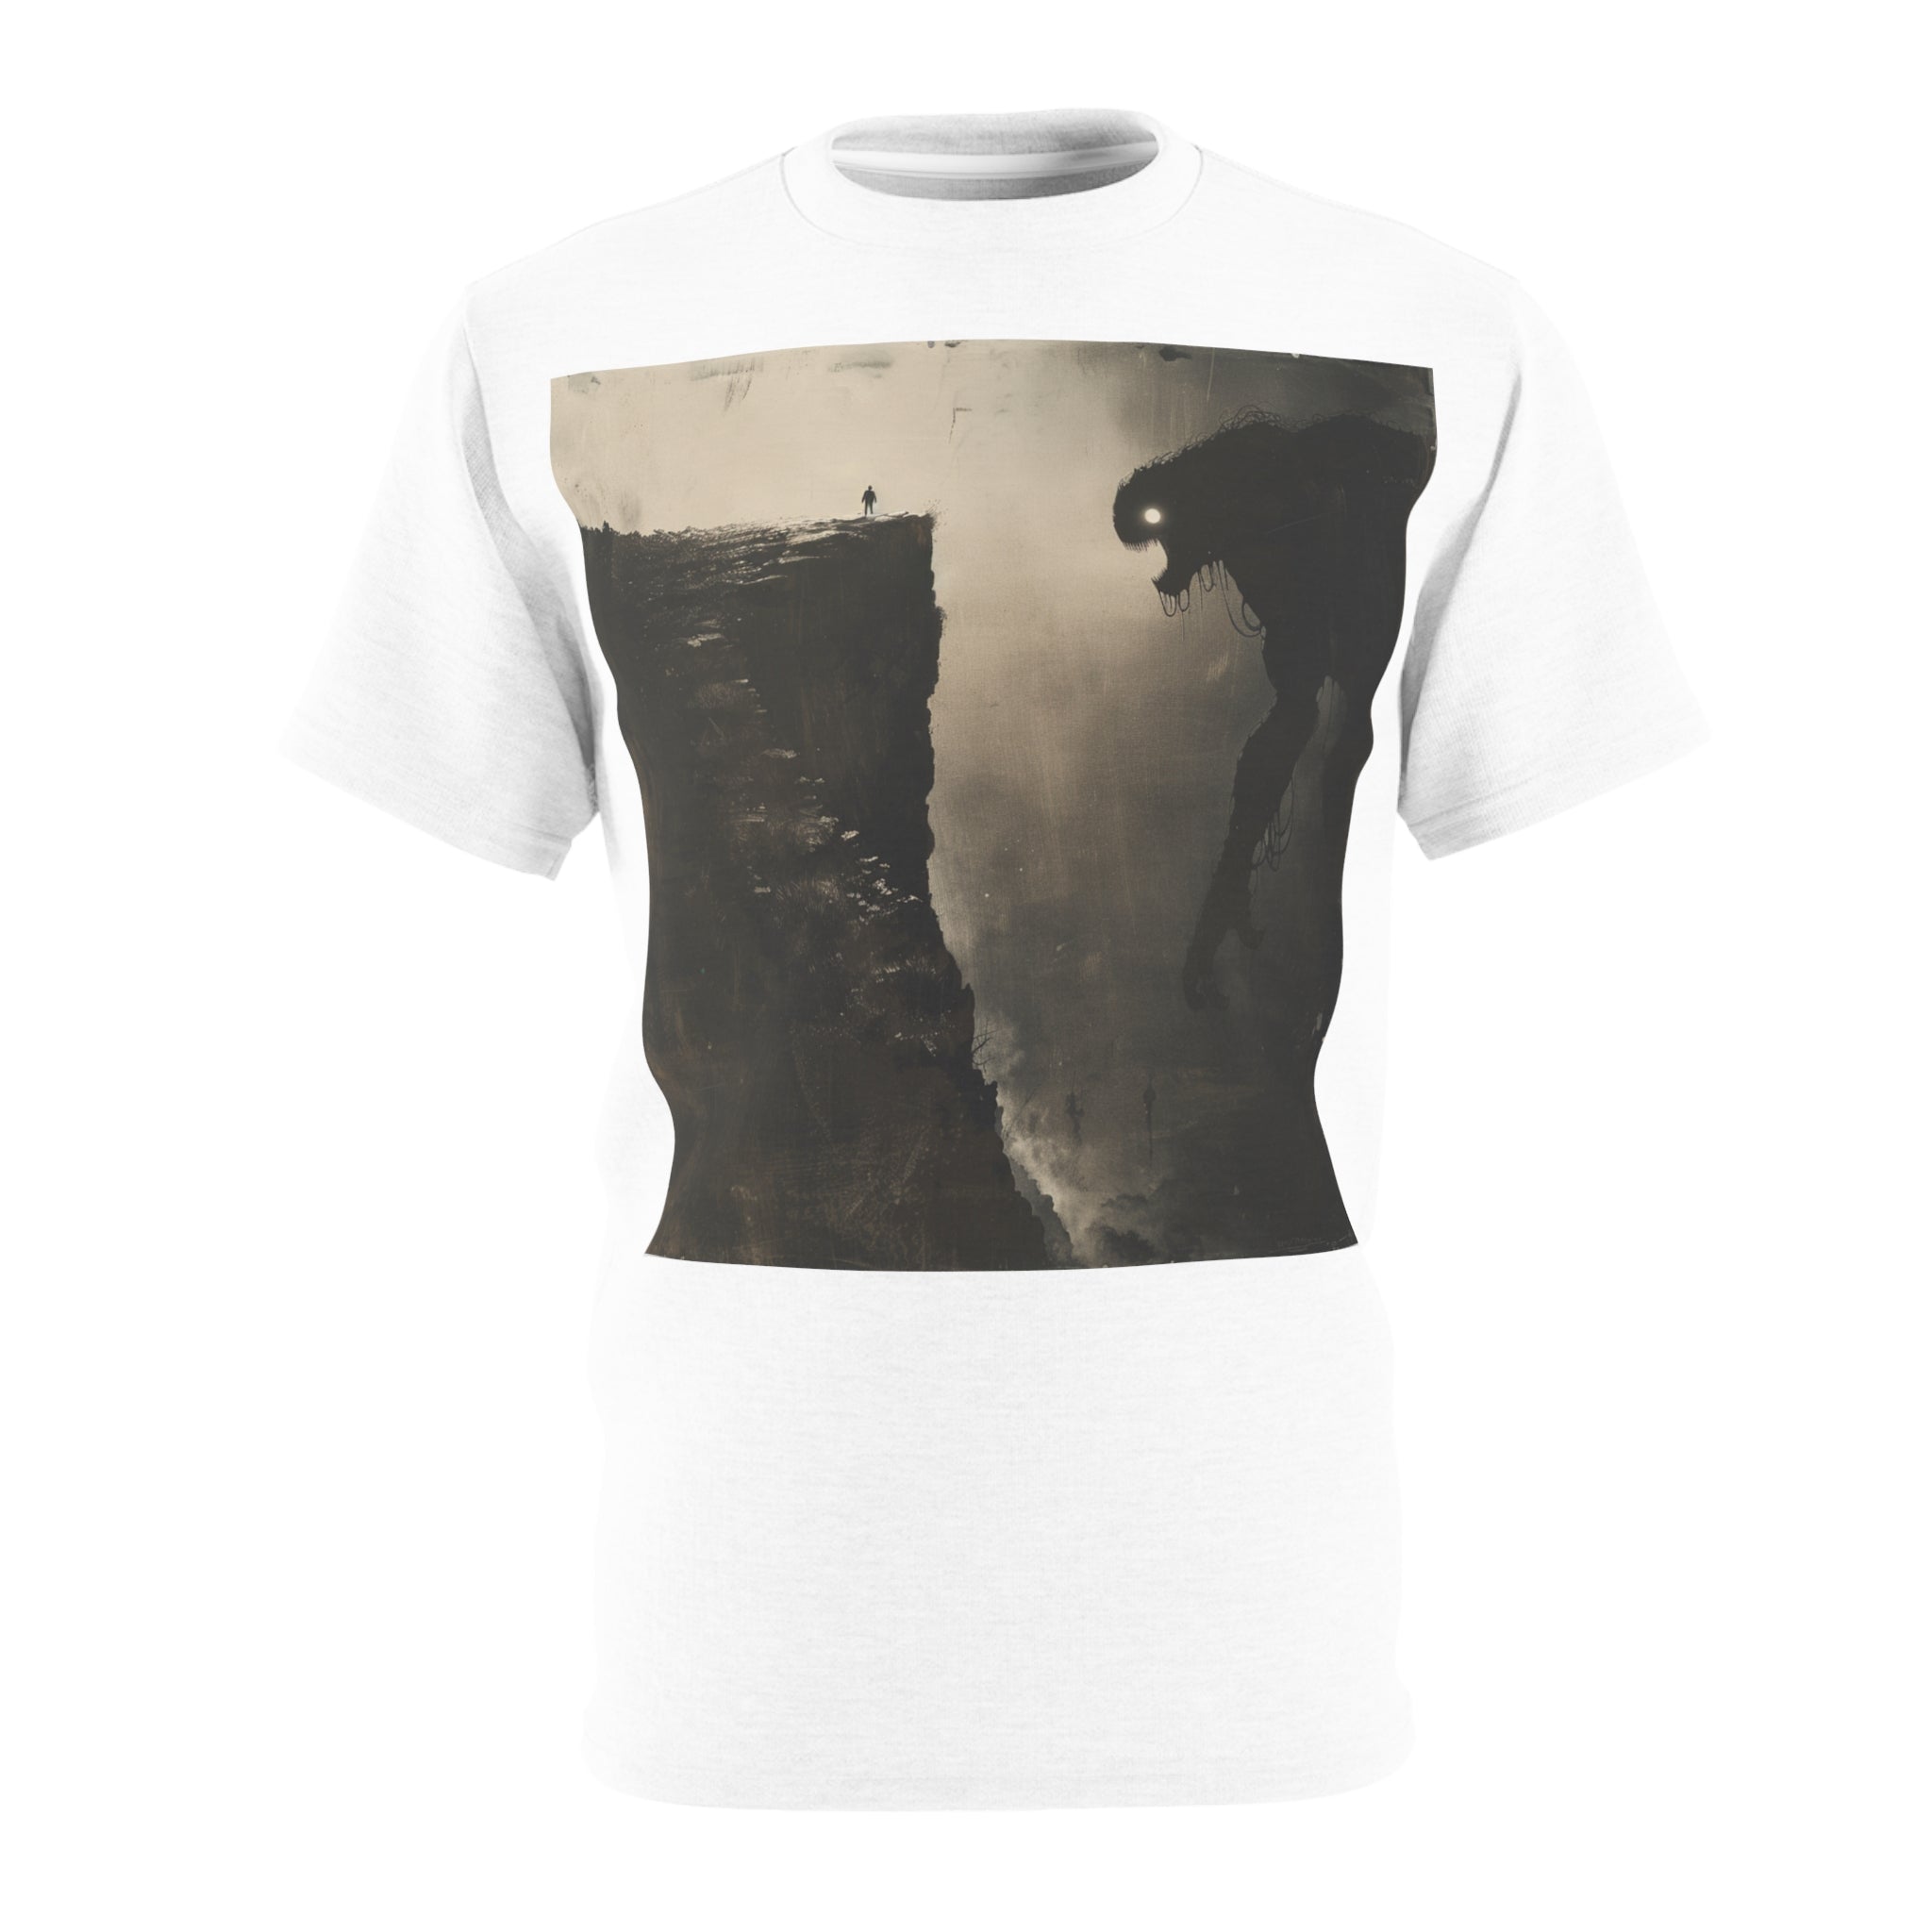 The image features a dynamic, full-coverage print on a unisex tee, showcasing an artistic rendition of a man standing resiliently on a cliff, facing the enormous shadow of a monster - a metaphor for his inner fears. The detailed artwork extends across the fabric, highlighting the tee’s cut and sew craftsmanship, while the vibrant colors and bold imagery make it a standout piece of motivational apparel.